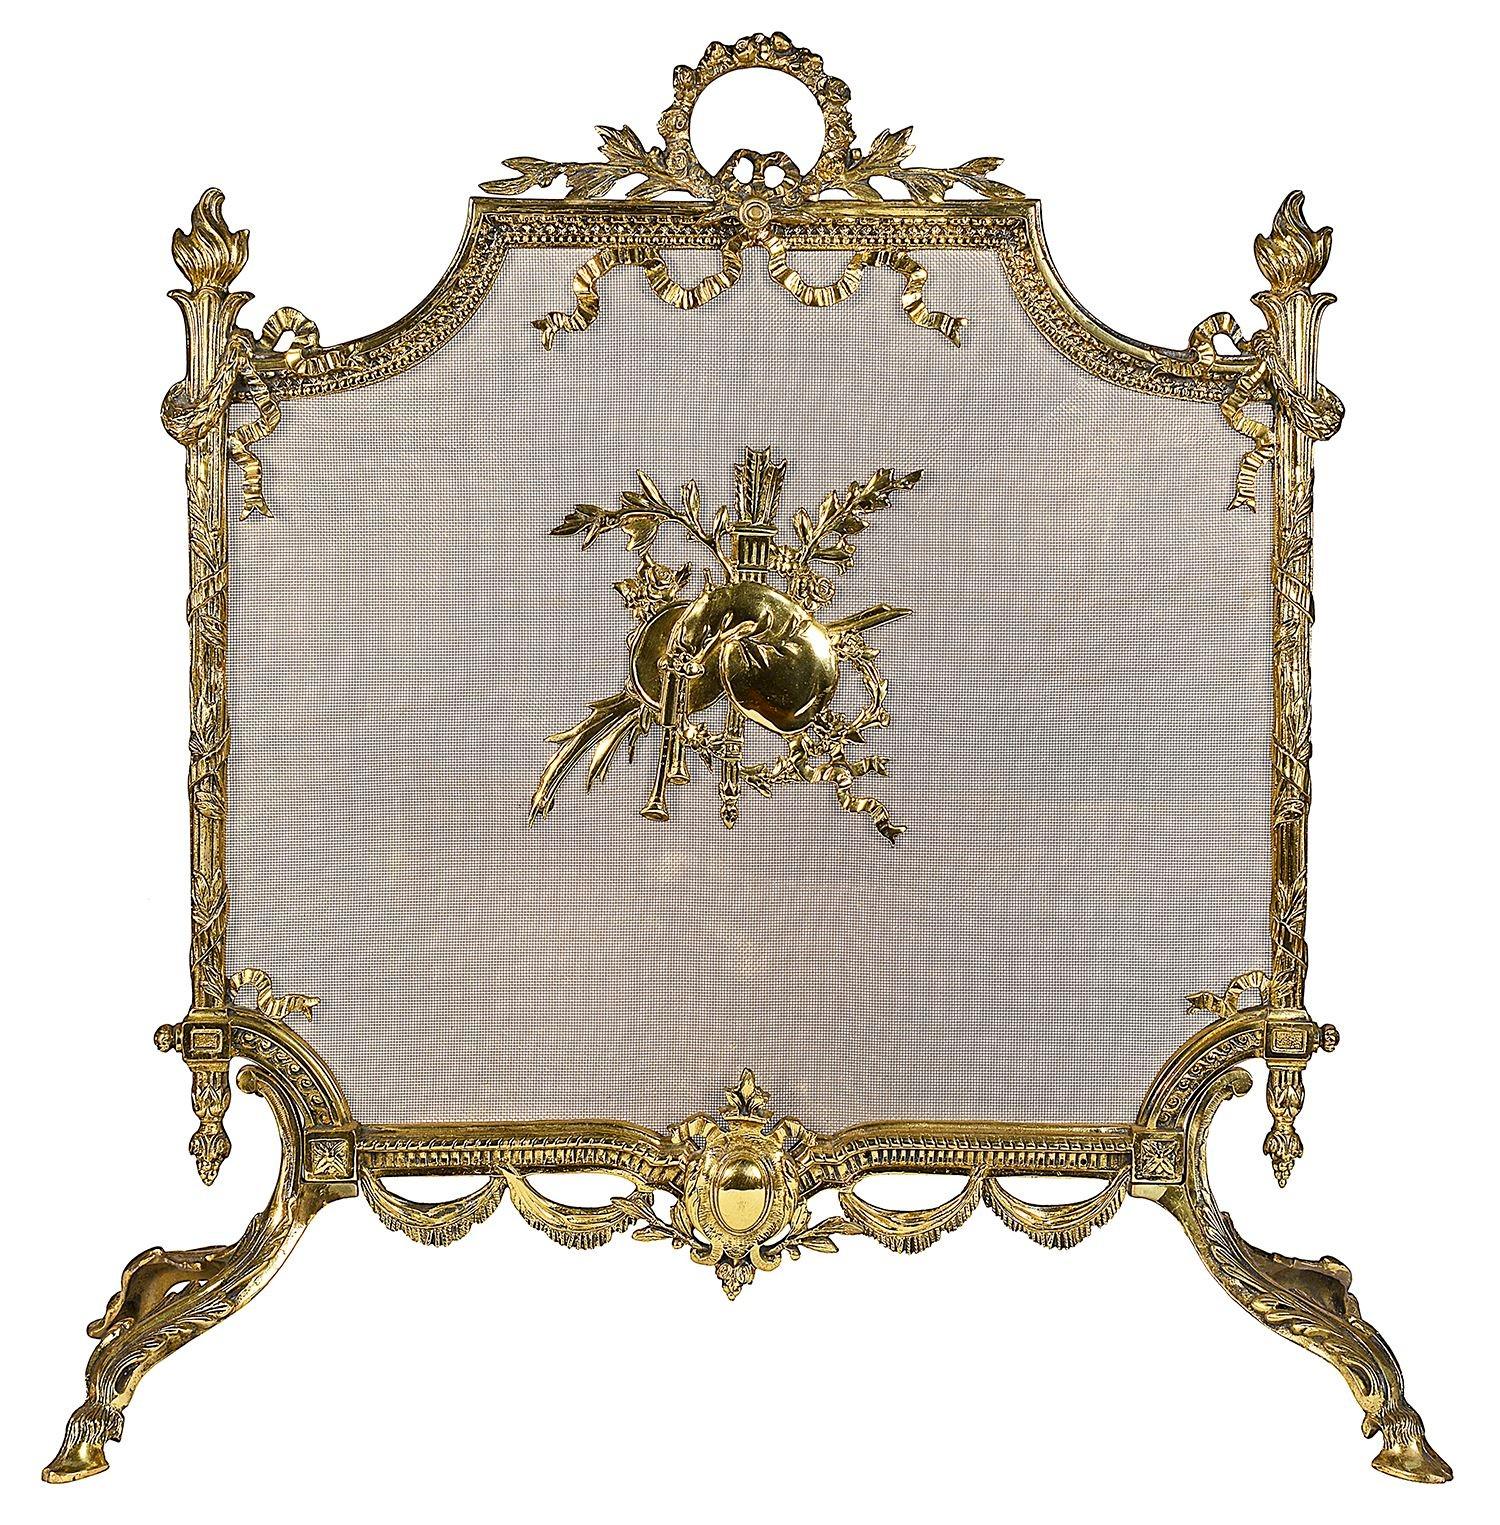 Late 19th Century French gilded ormolu fire scree, having classical scrolling foliate, motif and ribbon decoration. the central mount of musical instruments and an arrow quiver, raised on hoof feet.
 
Batch 73 61671 CZZN
 
 
 
 
 
Batch 73 61671 CZZN